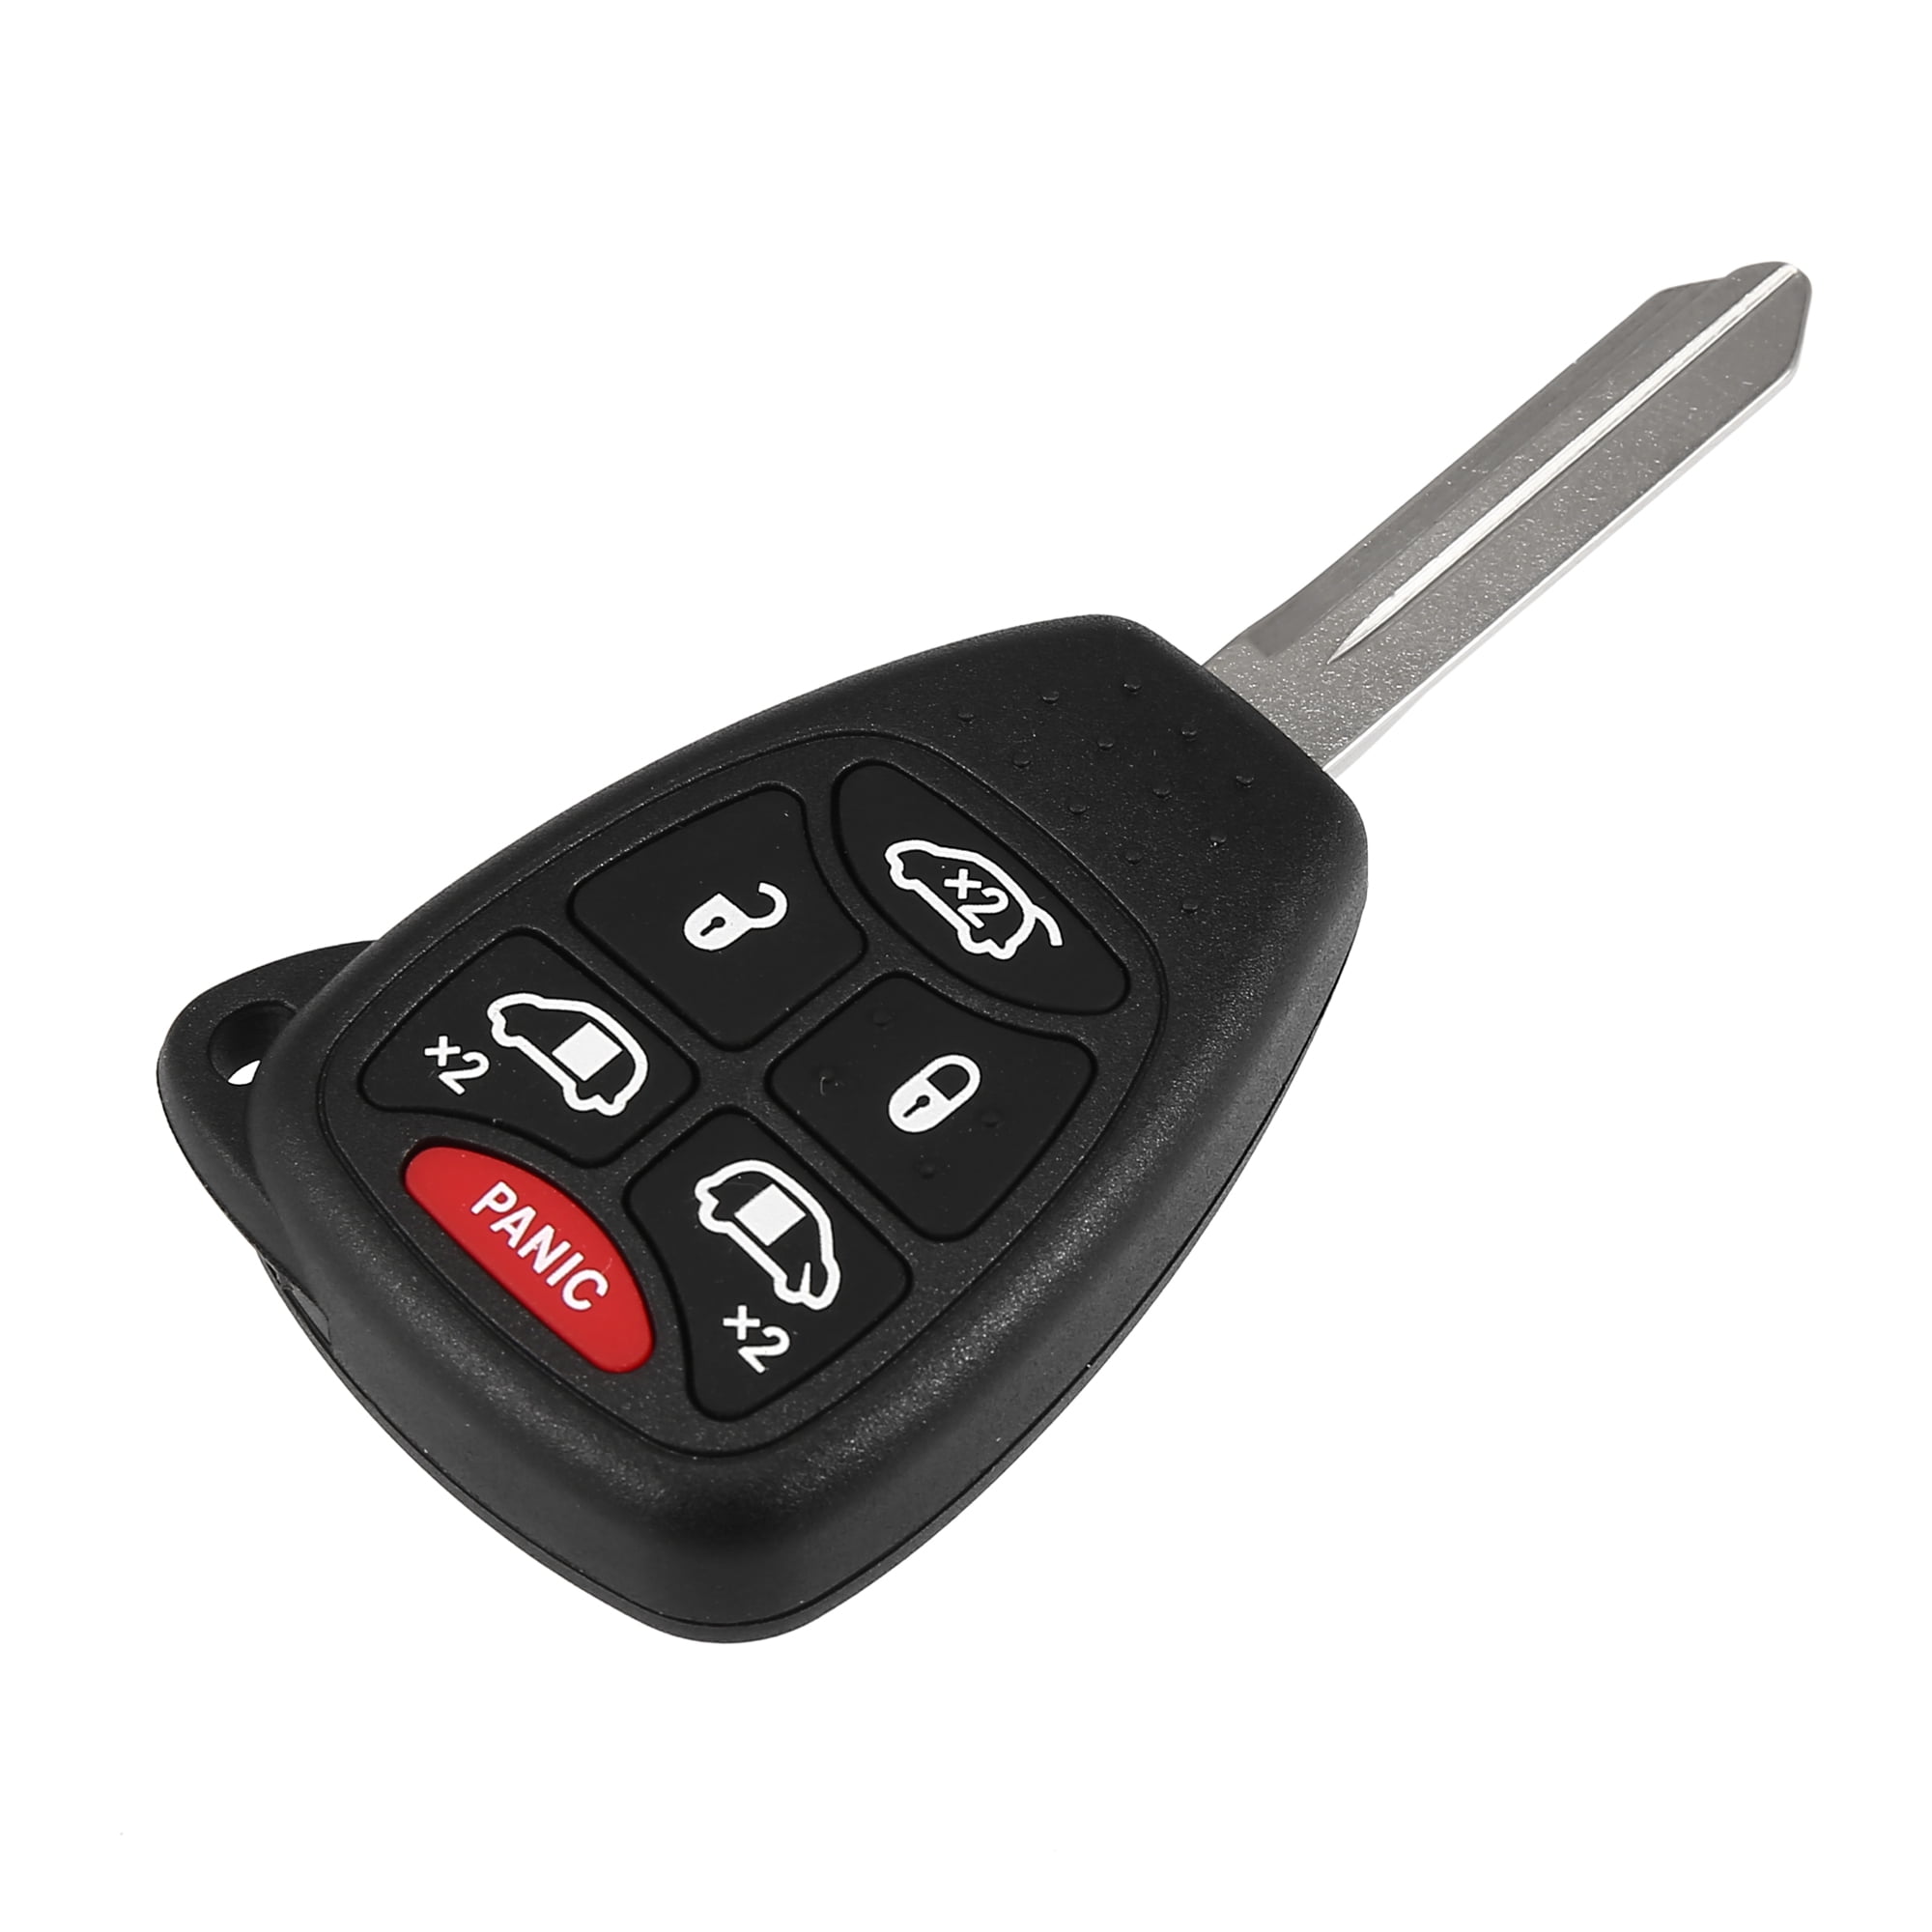 Replacement Keyless Entry Remote Car Key Fob M3N5WY72XX 315MHz for Chrysler  for Dodge Caravan 6 Button with Door Key